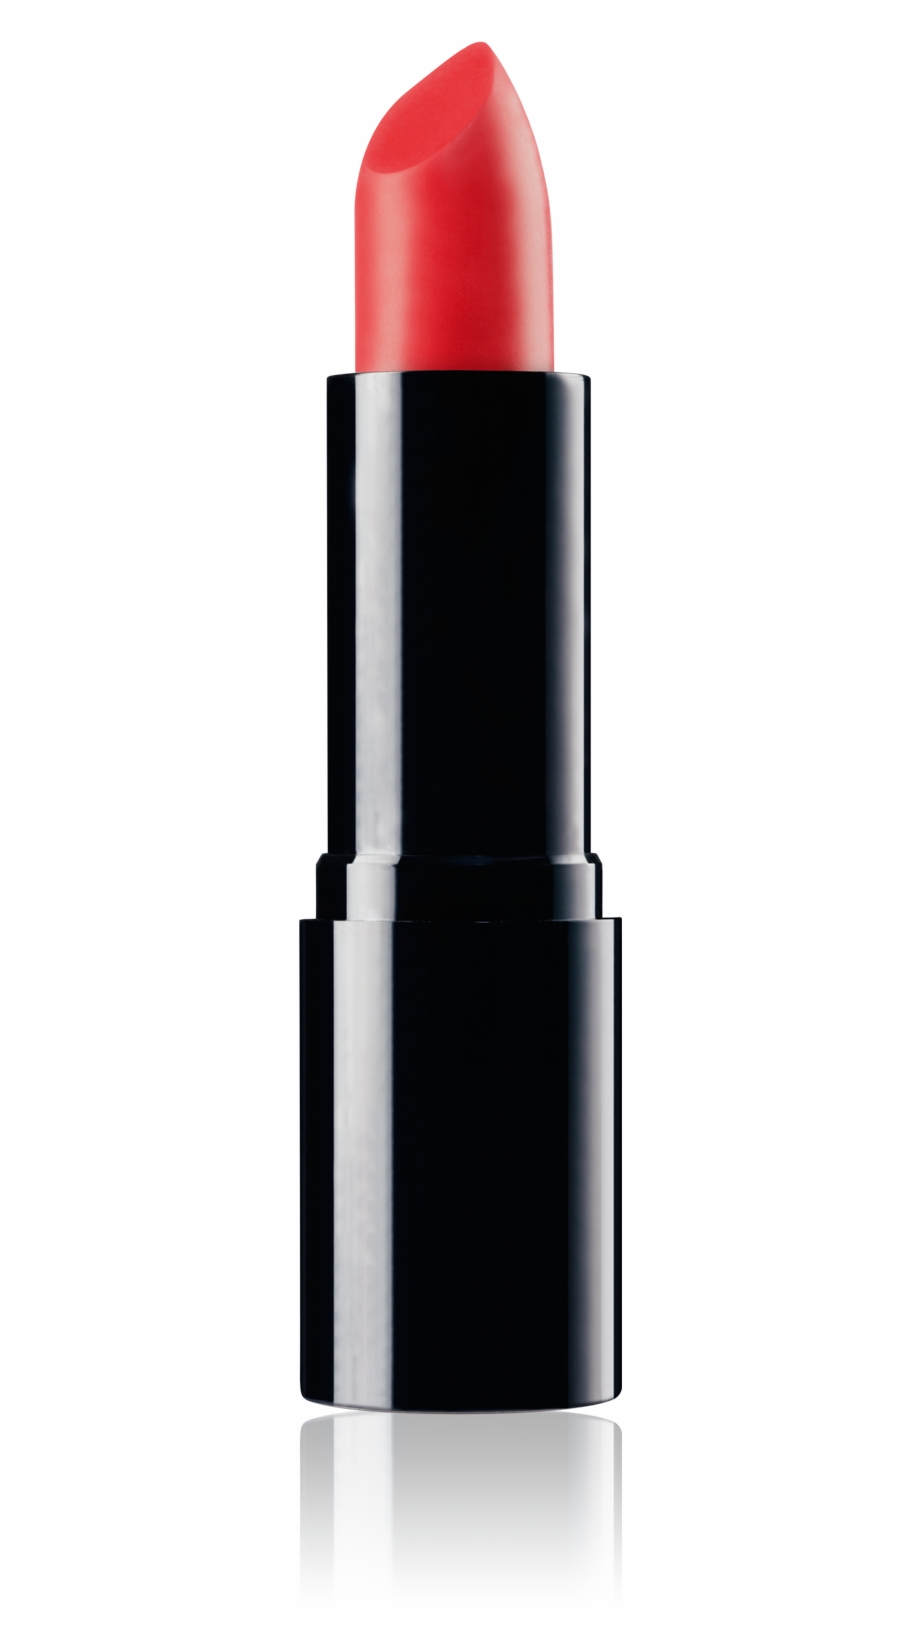 Lipstick Png Pic.